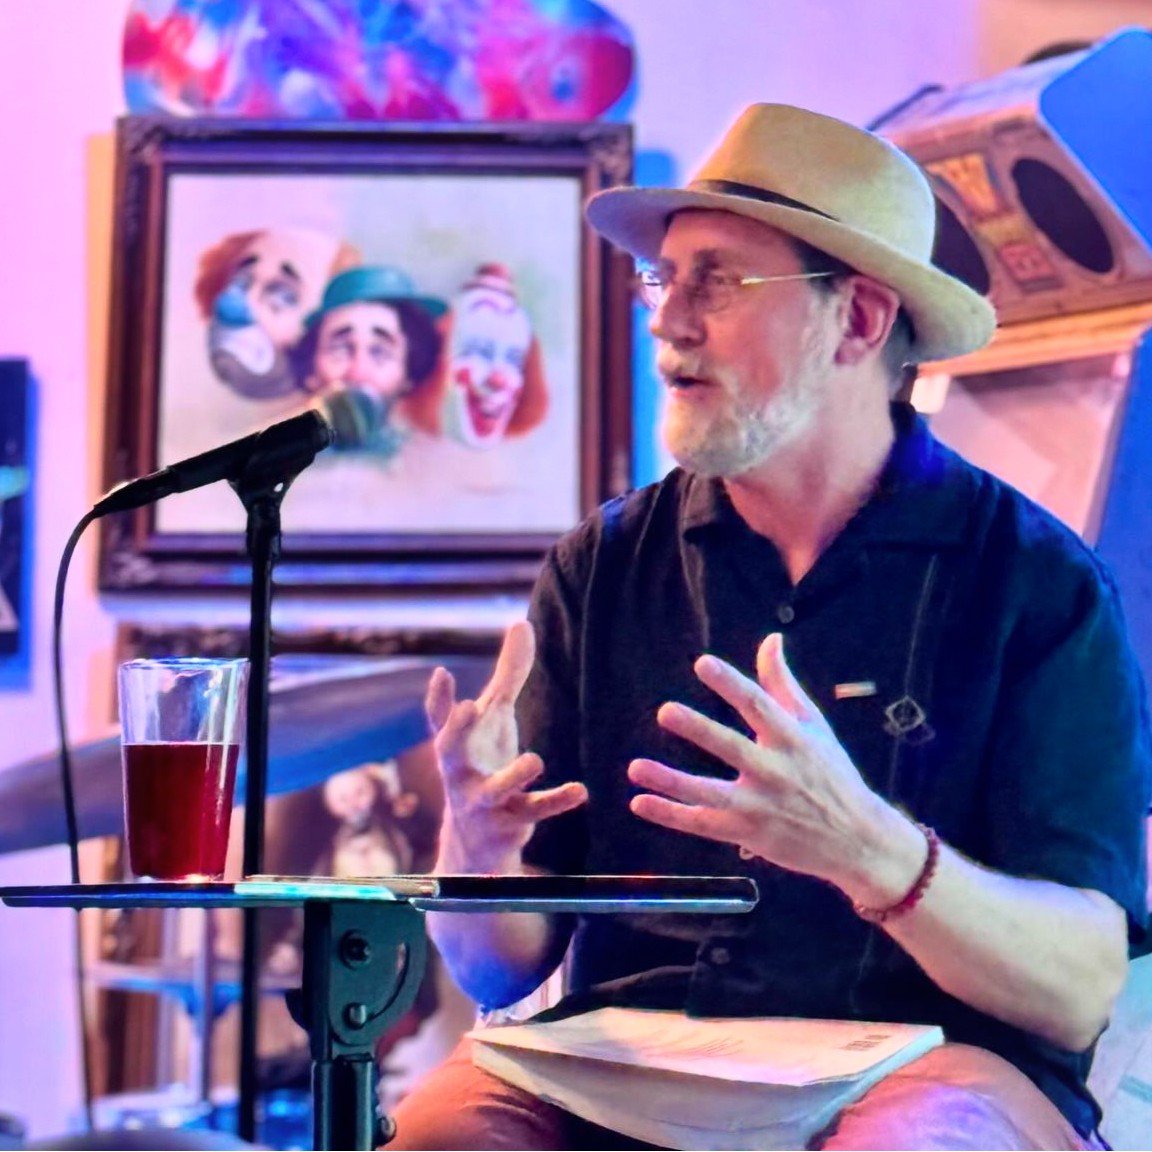 What a fantastic event with author Erik Davis this past weekend!!!

It was such a thrill to finally get the genial gentleman scryer of the Strange out here to share his newest work with our odd cabal. Discussing his new book, &quot;Blotter: An Untold